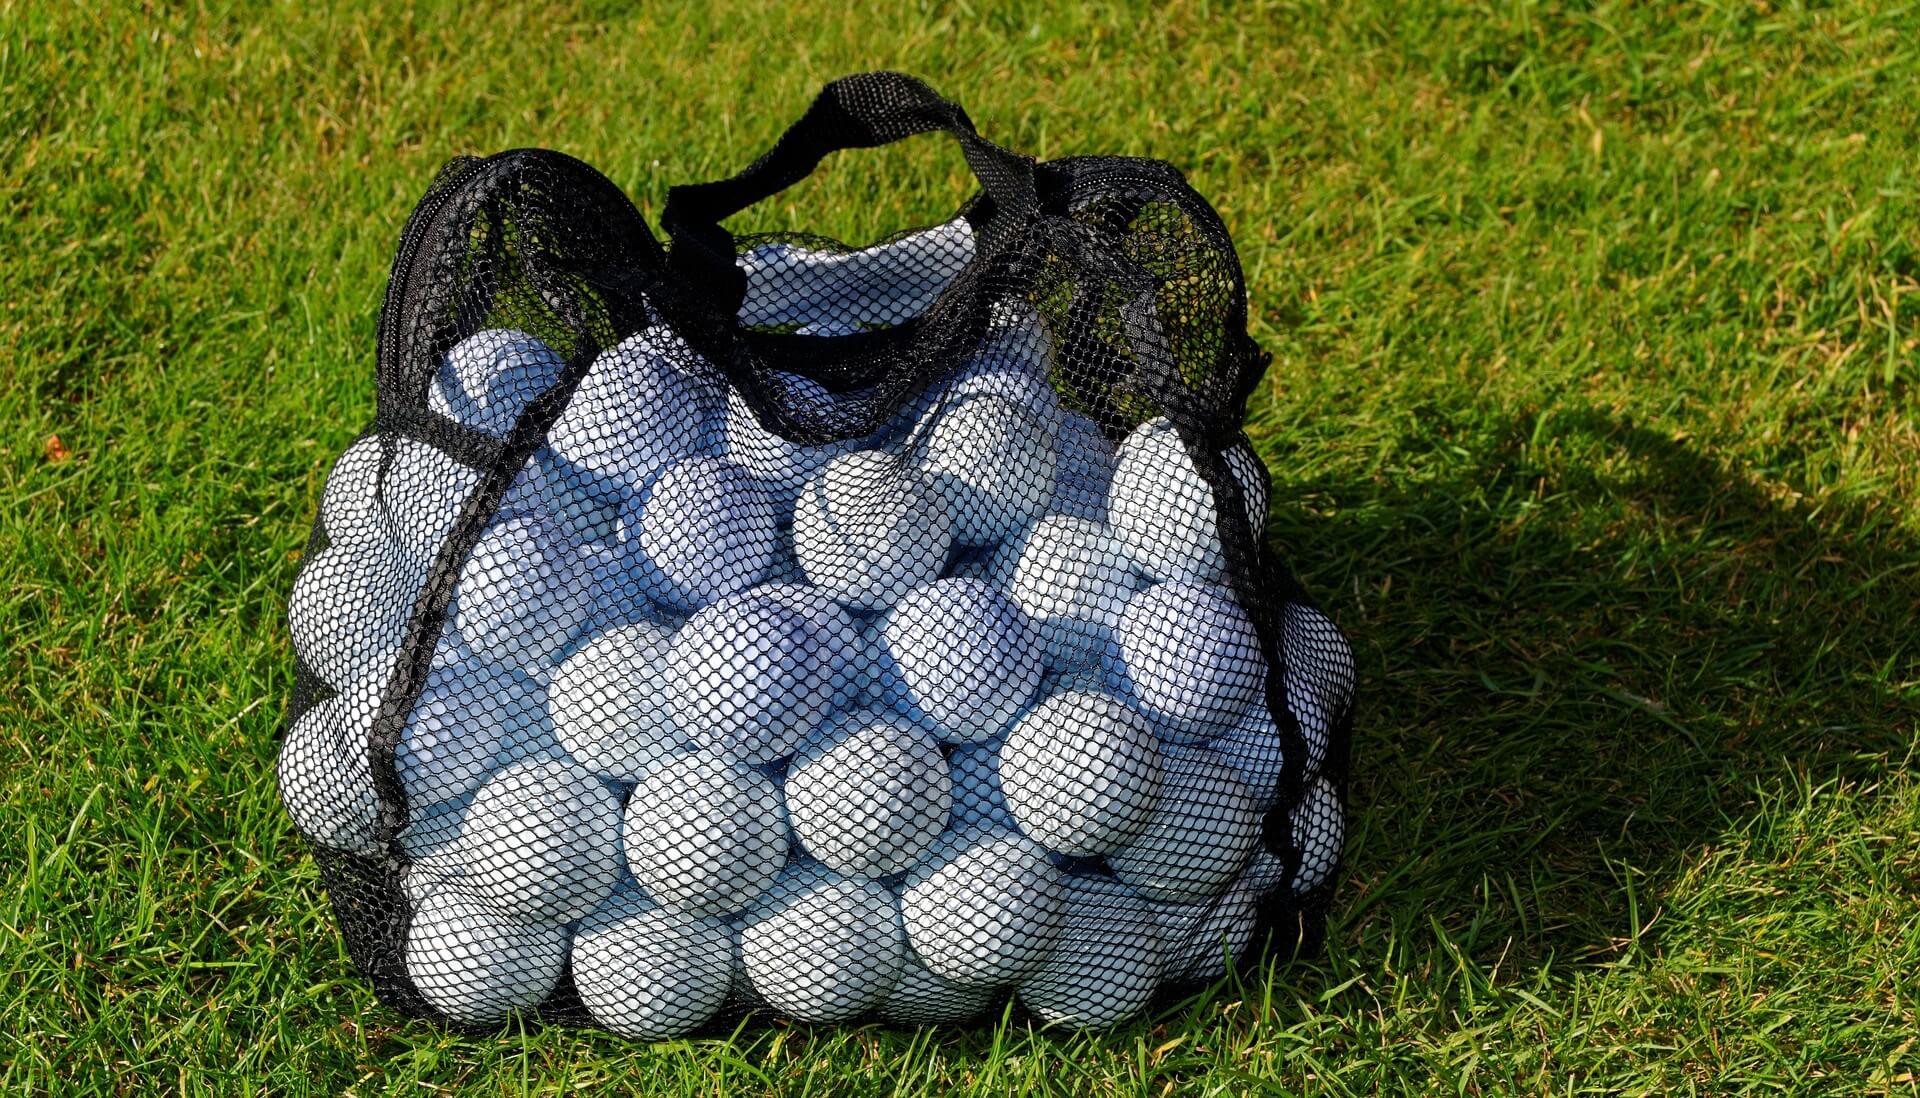 Picture of a sack of golf balls on grass